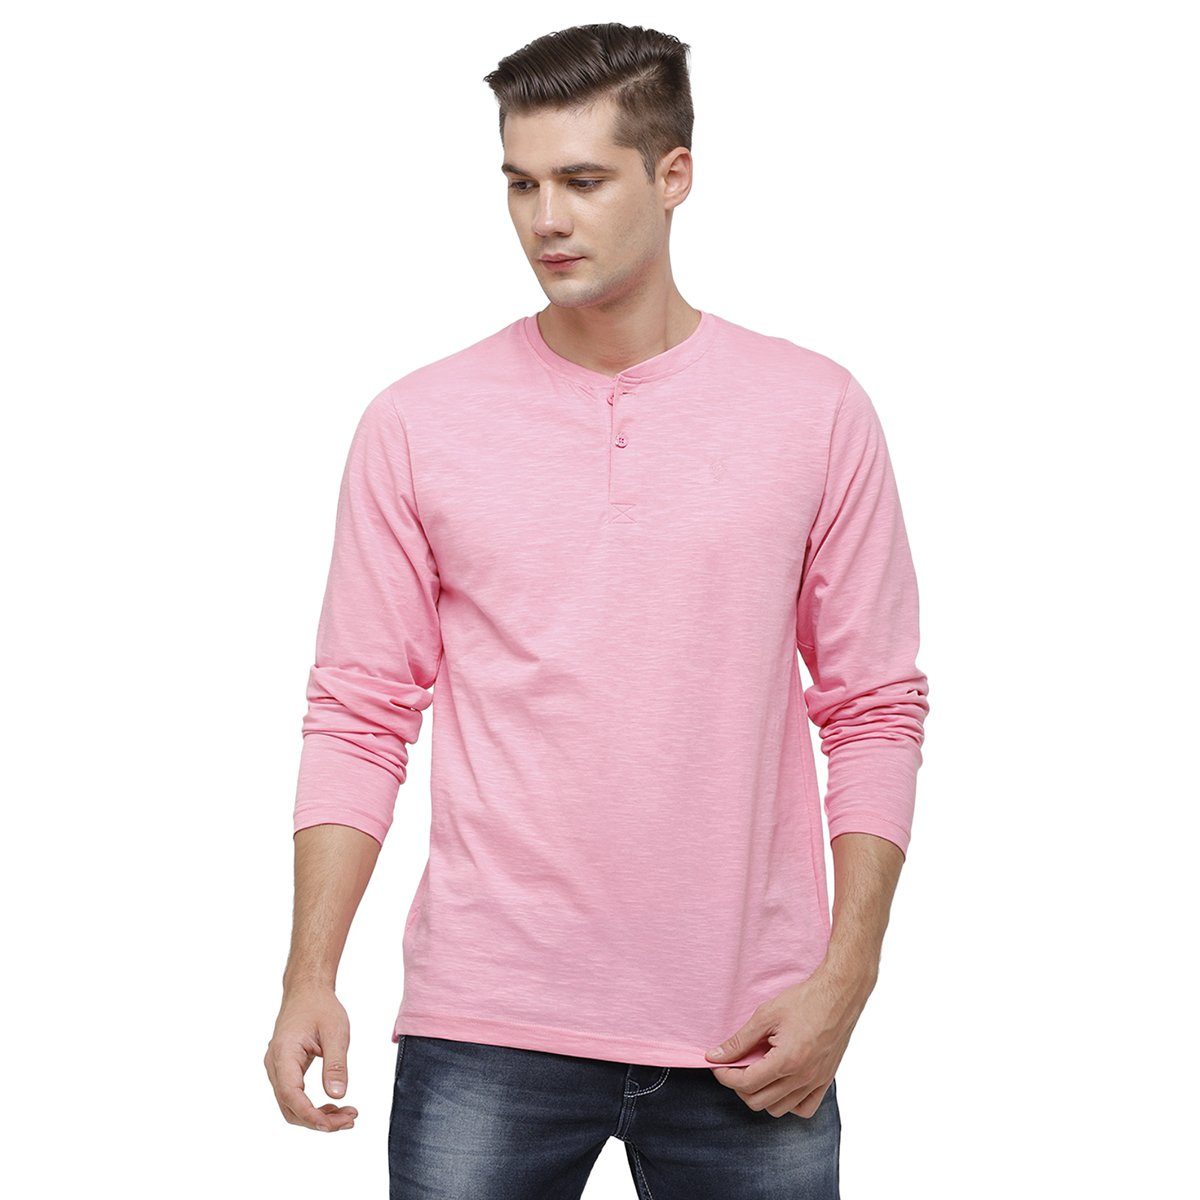 Classic polo Men's Pink Full Sleeve Slim Fit Henley Crew T-Shirt - Ozel - Begonia Pink T-shirt Classic Polo 